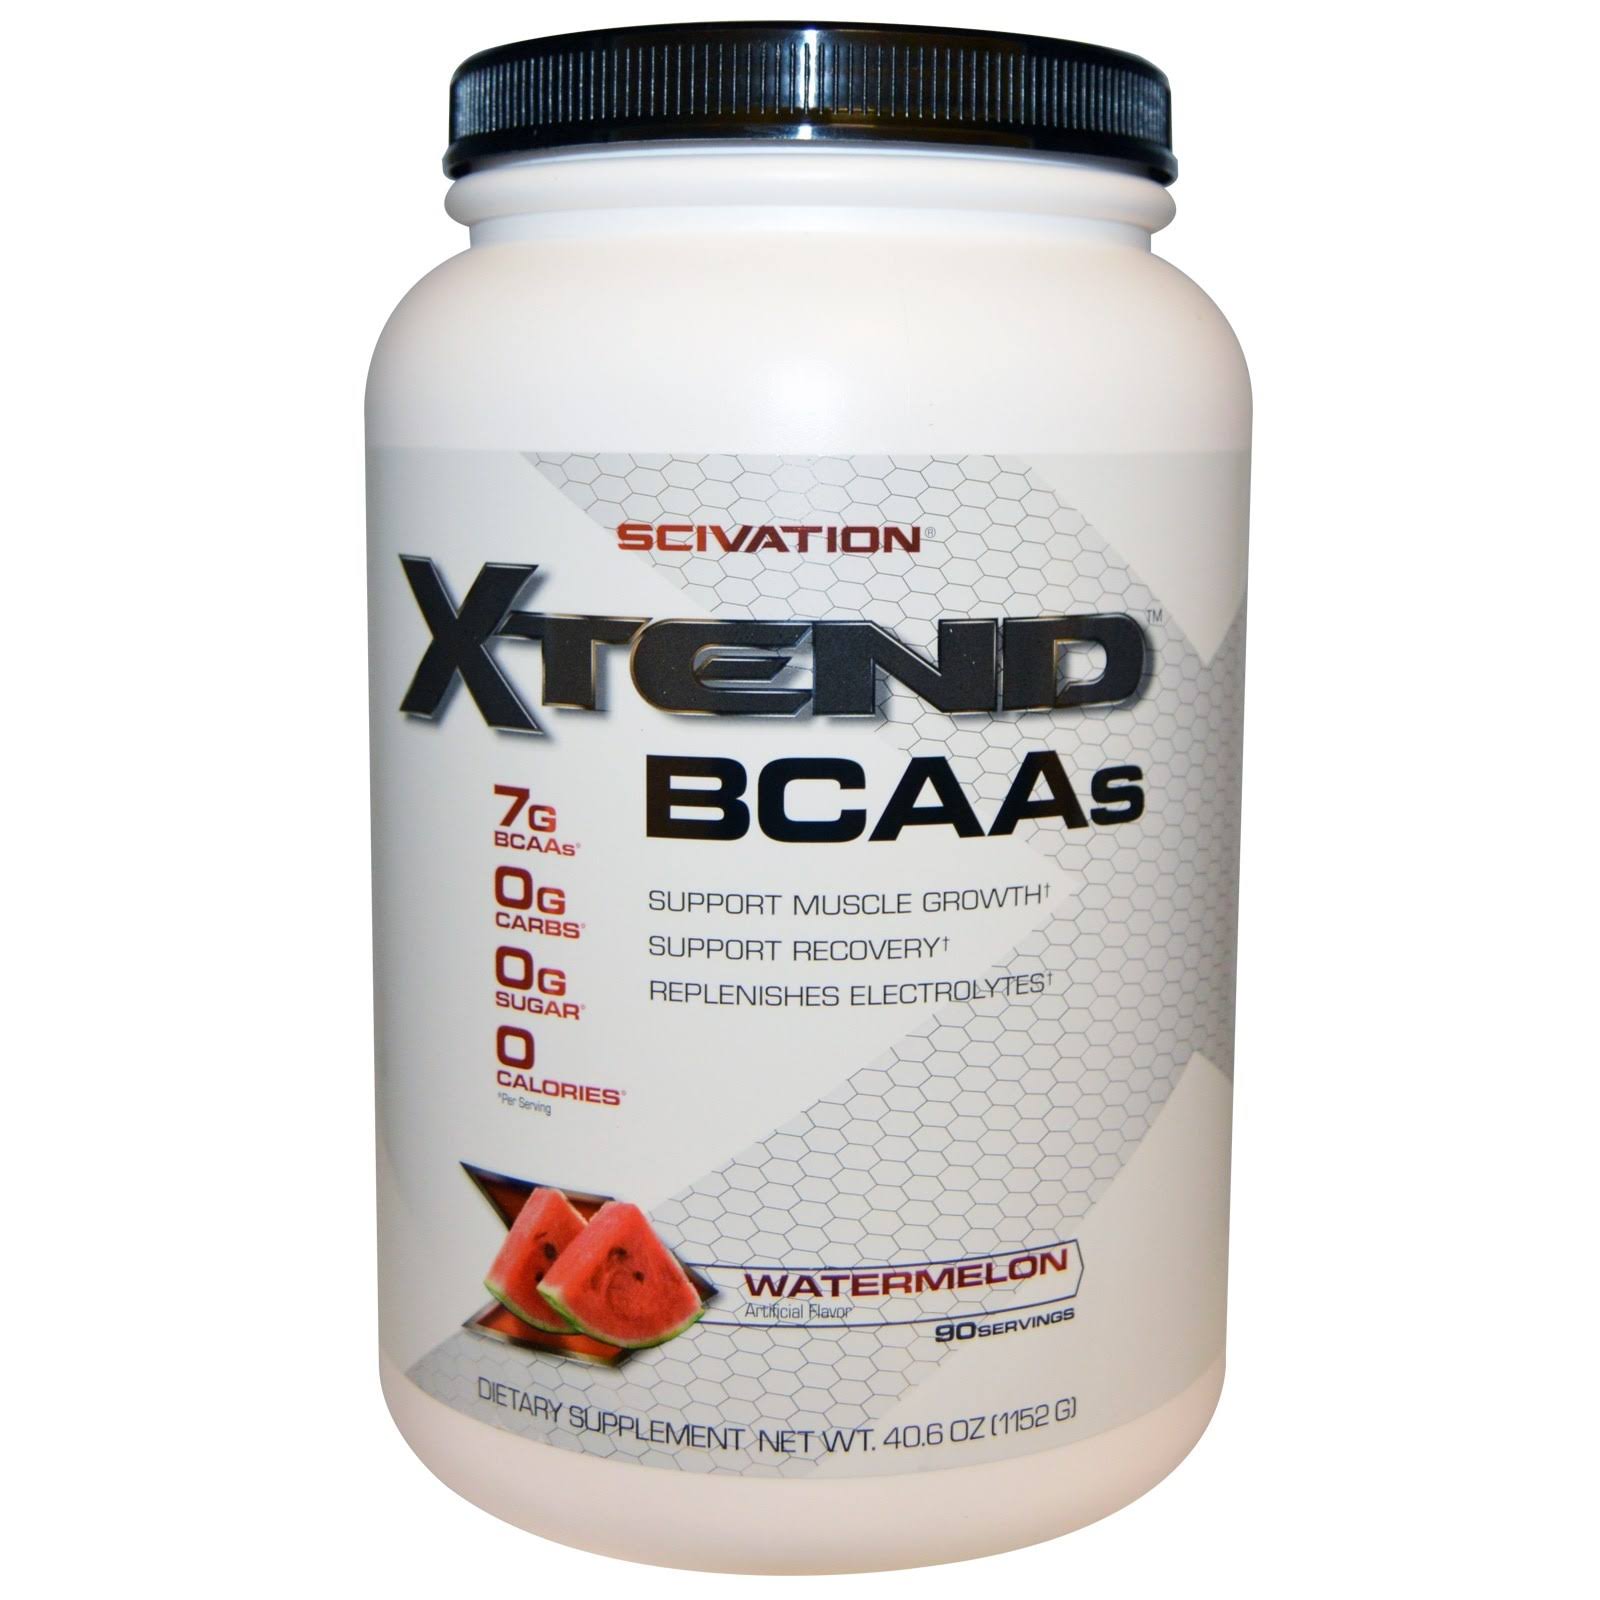 Scivation Xtend BCAAs Dietary Supplement - Watermelon Madness, 90 Servings